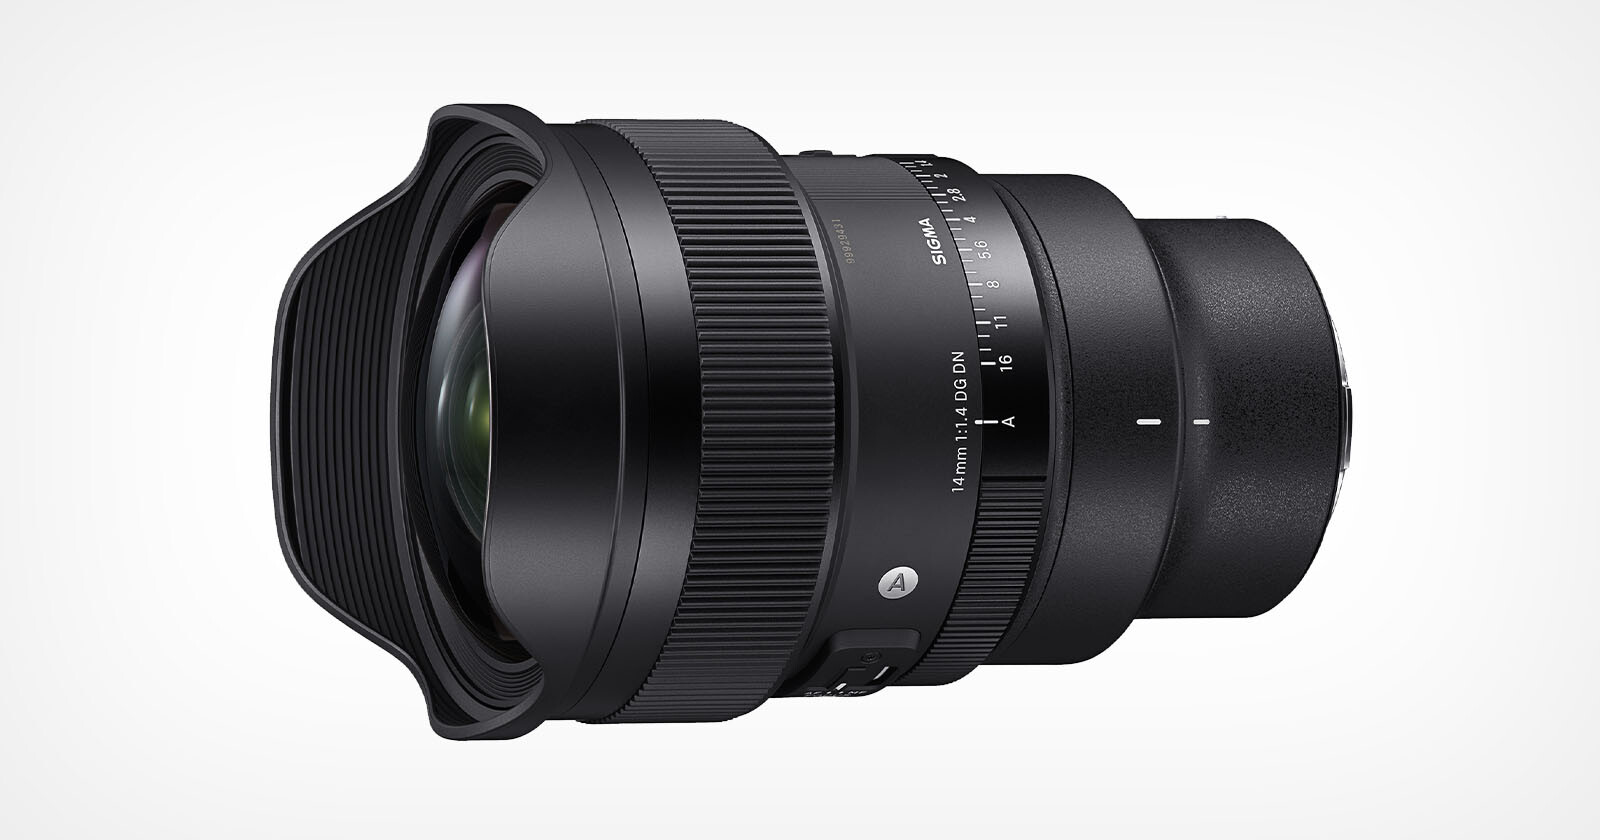 Sigmas New 14mm f/1.4 Art Lens is Tailor-Made for Astrophotography